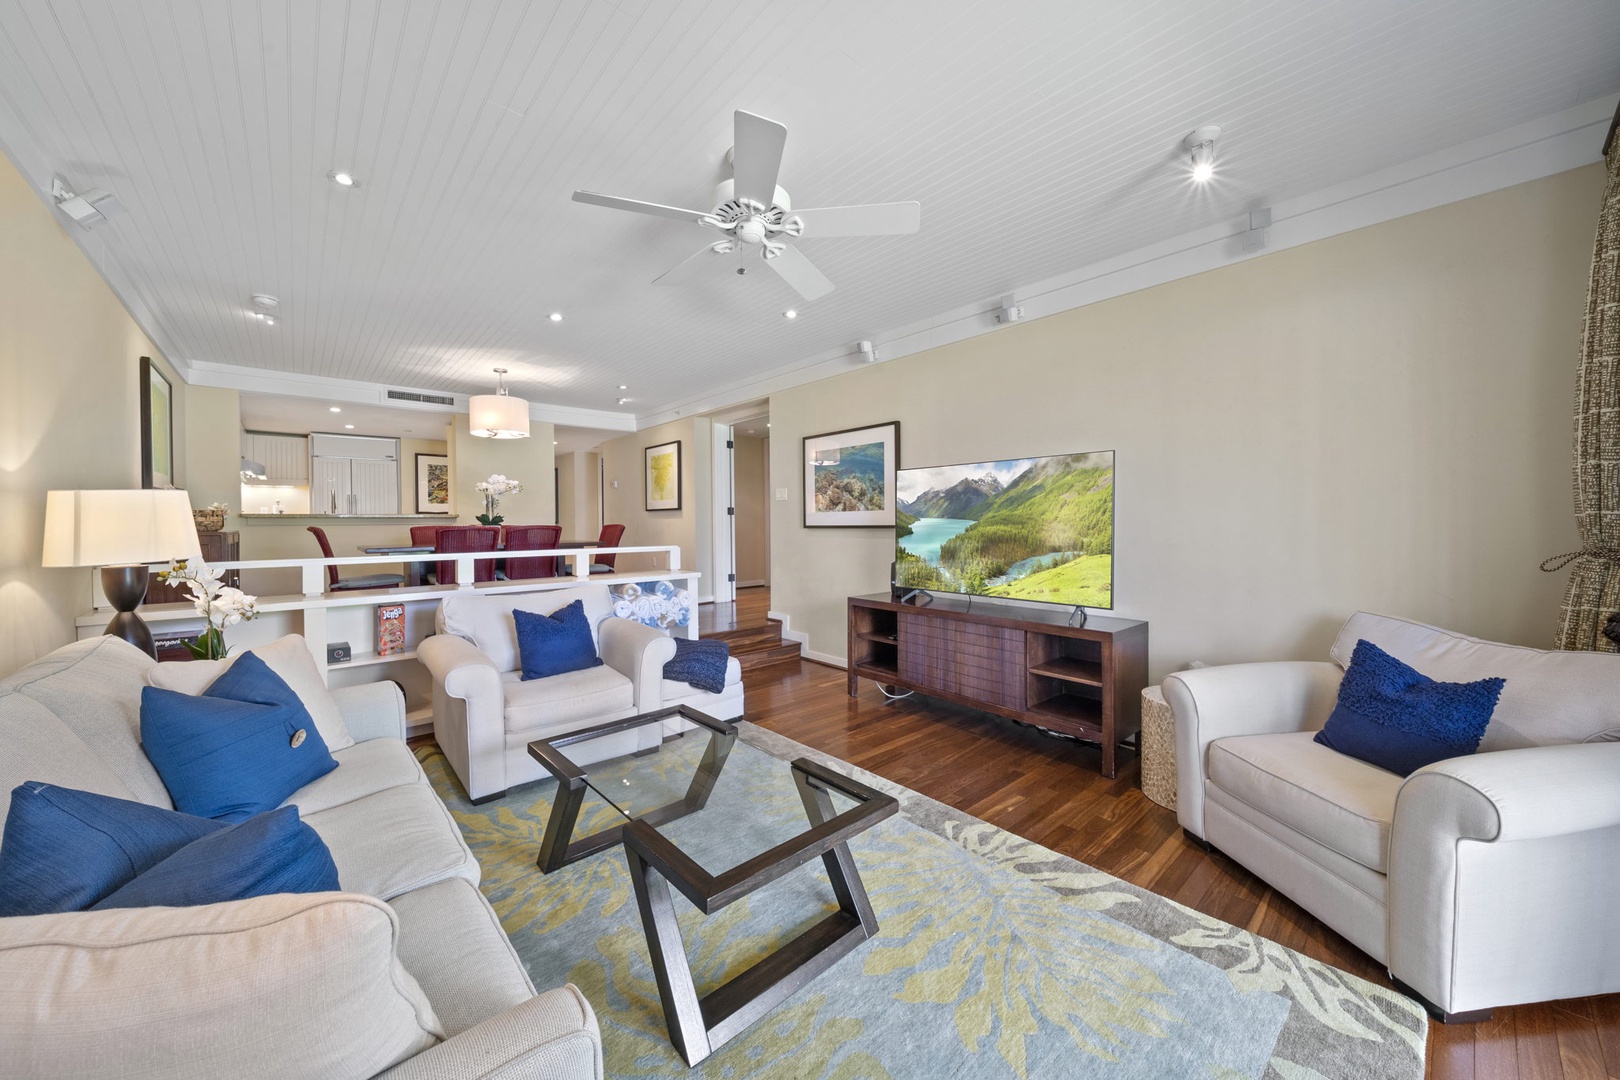 Kahuku Vacation Rentals, Turtle Bay Villas 114 - Furnished with couches, chairs, and a flatscreen TV for fun nights of entertainment